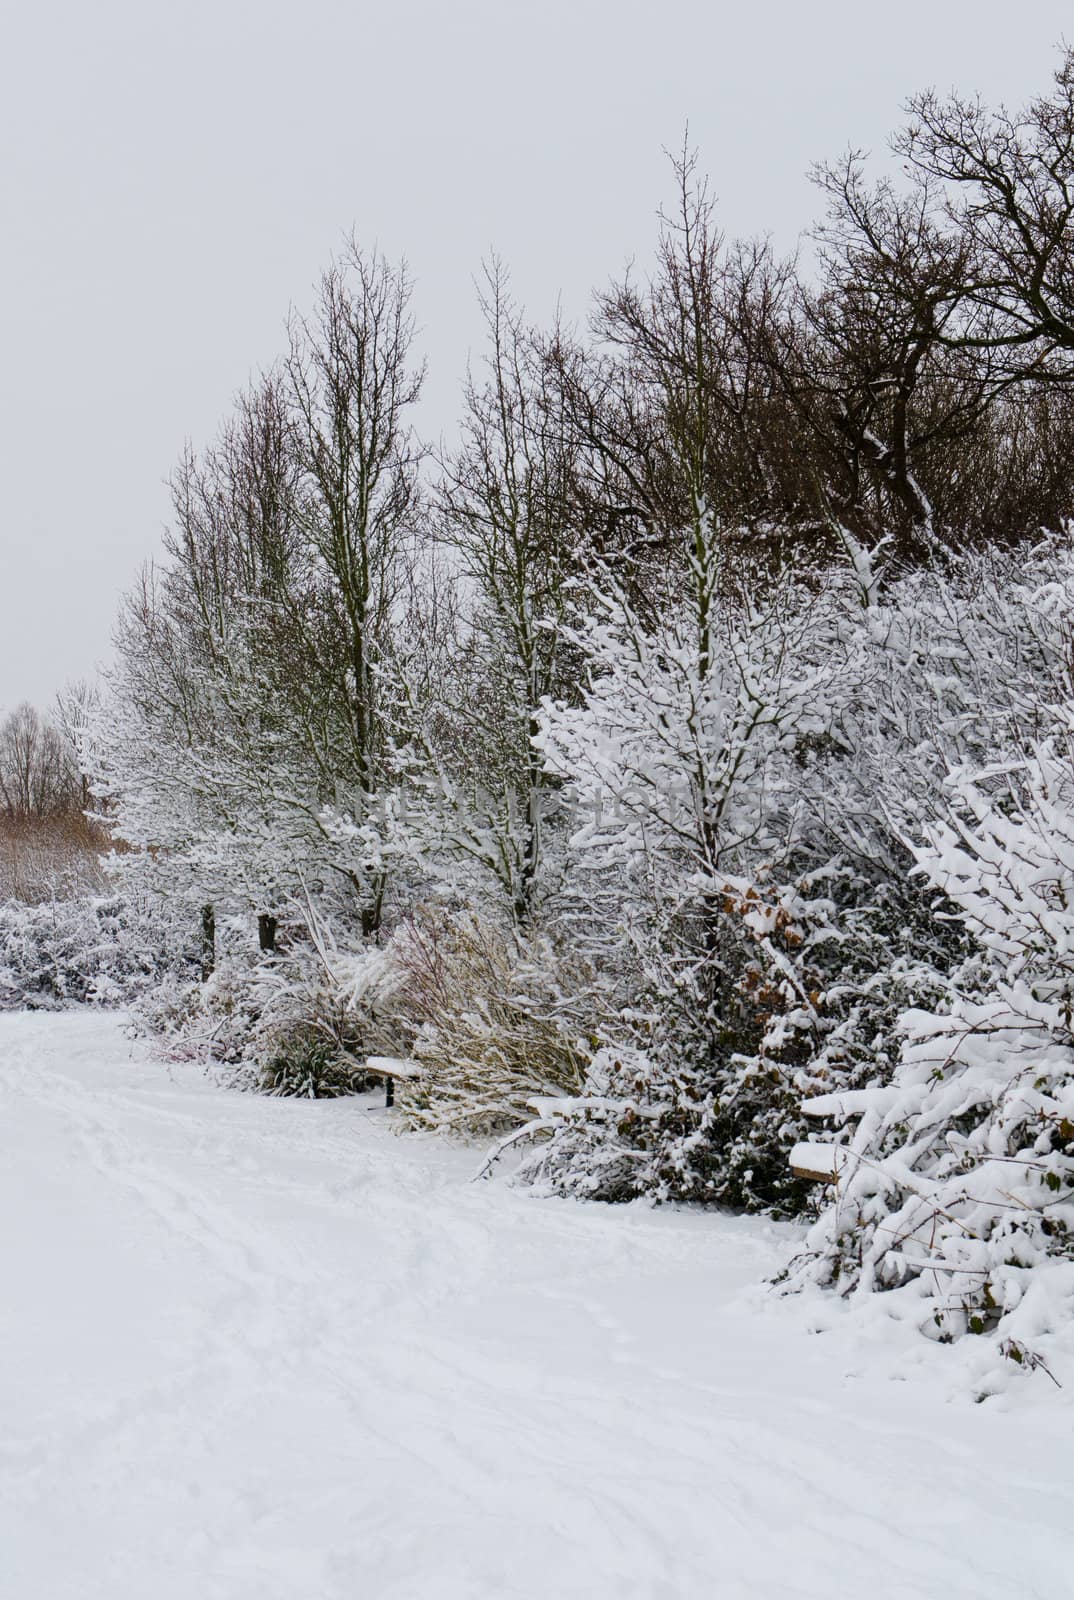 A row of trees next to a footpath covered with snow